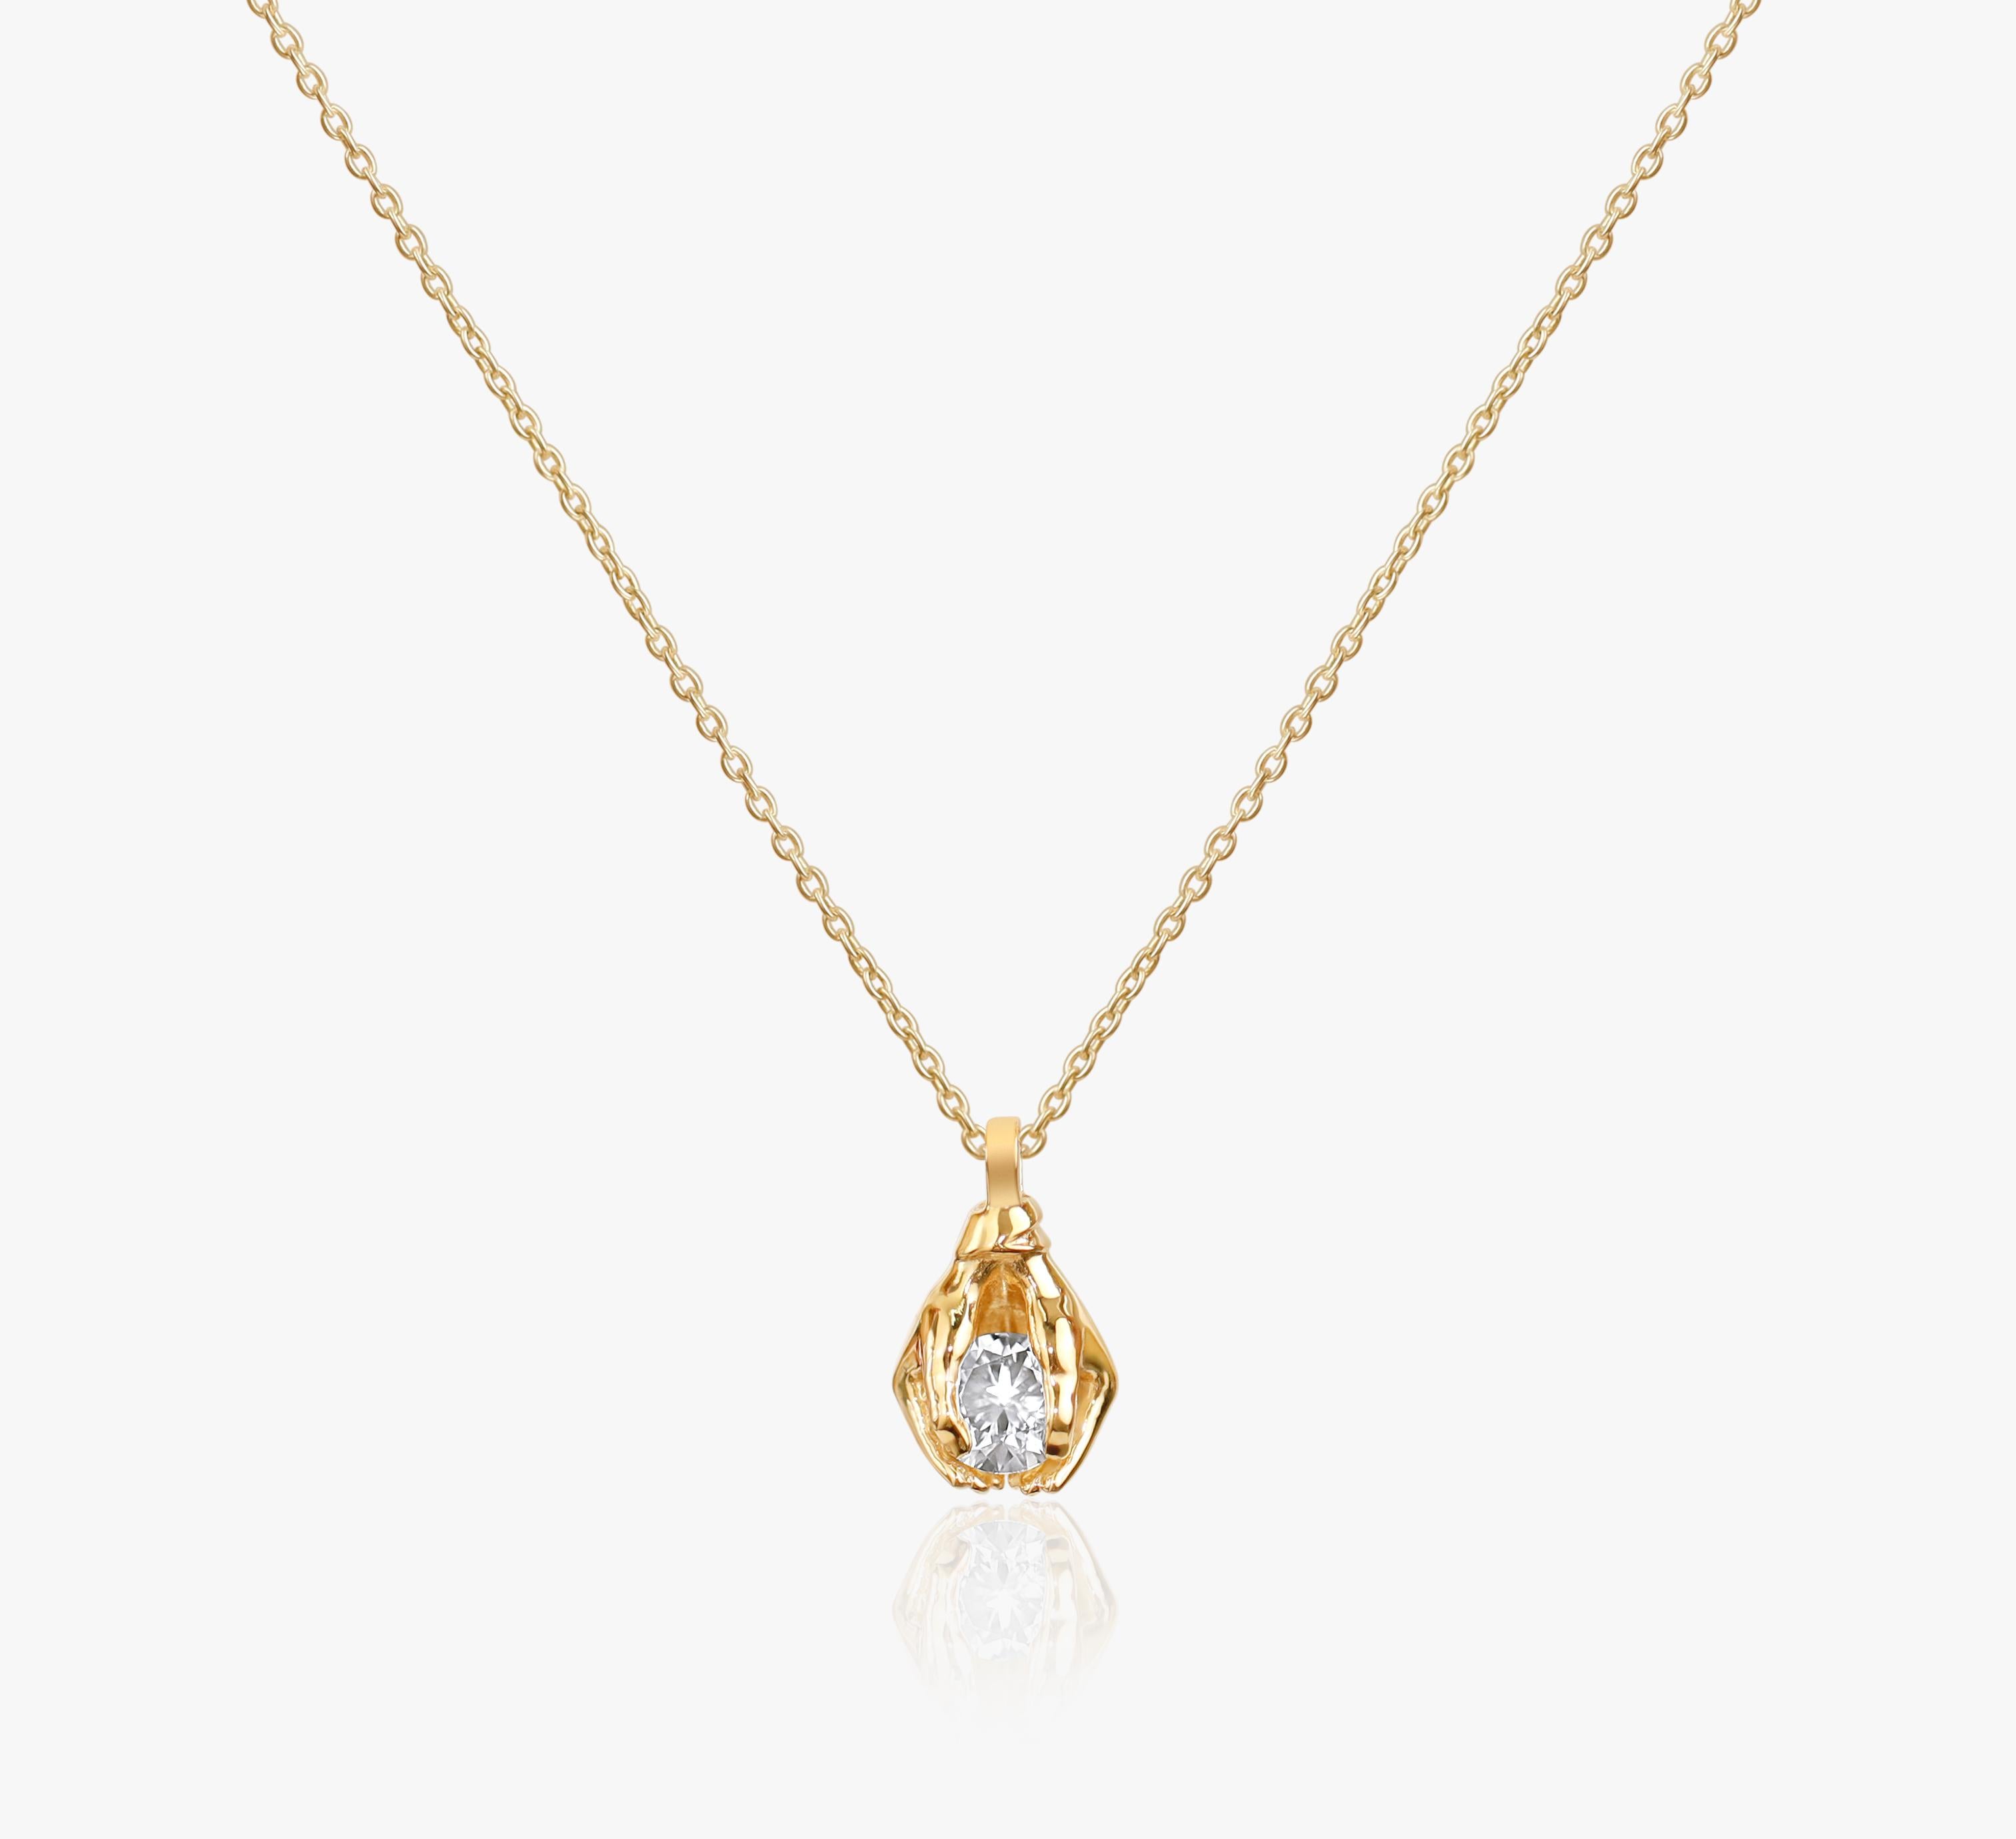 GIA Report Certified 1 Carat D Flawless Round Cut Diamond Pendant Necklace

Available in 18k Yellow gold.

Same design can be made also with other custom gemstones per request.

Product details:

- Solid gold 18k yellow 

- Main stone - approx. 1